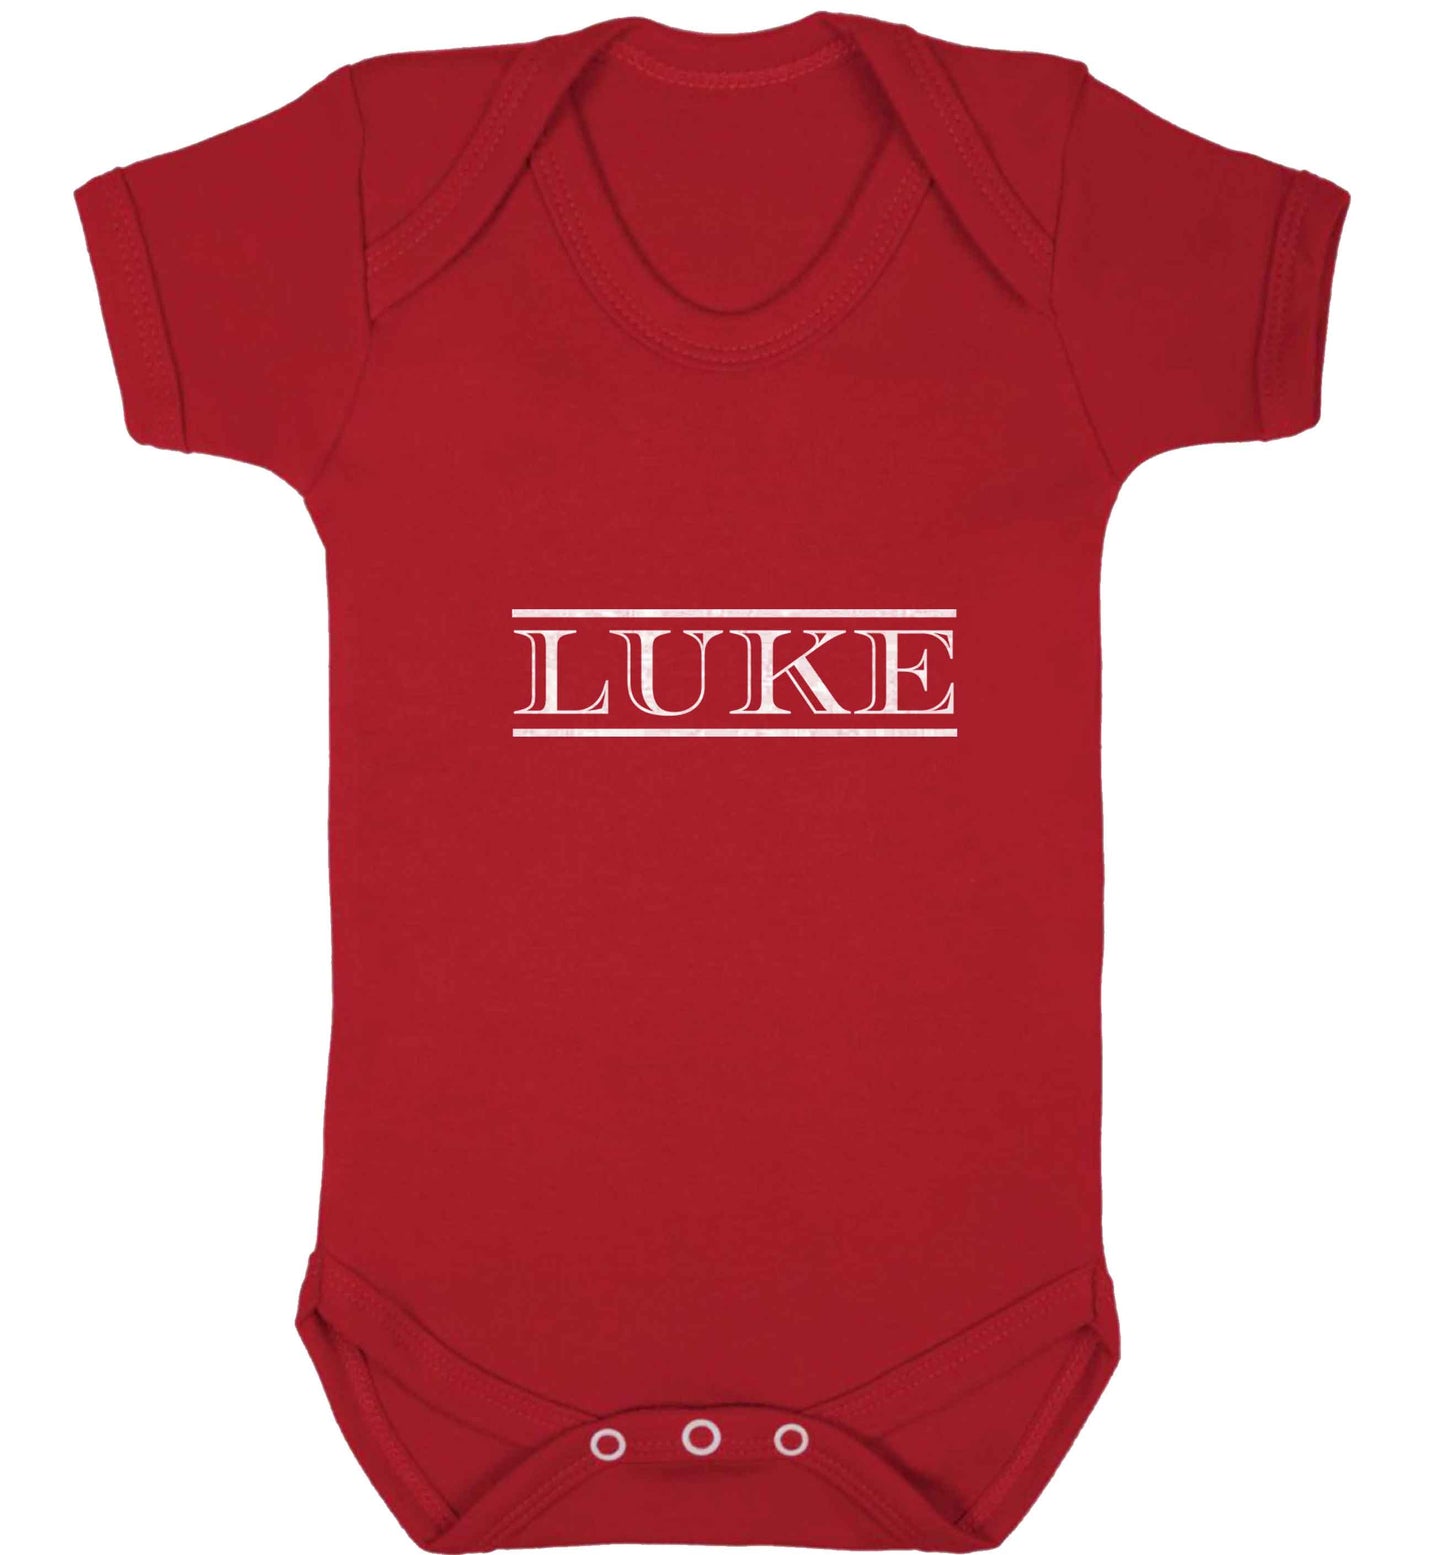 Personalised name baby vest red 18-24 months